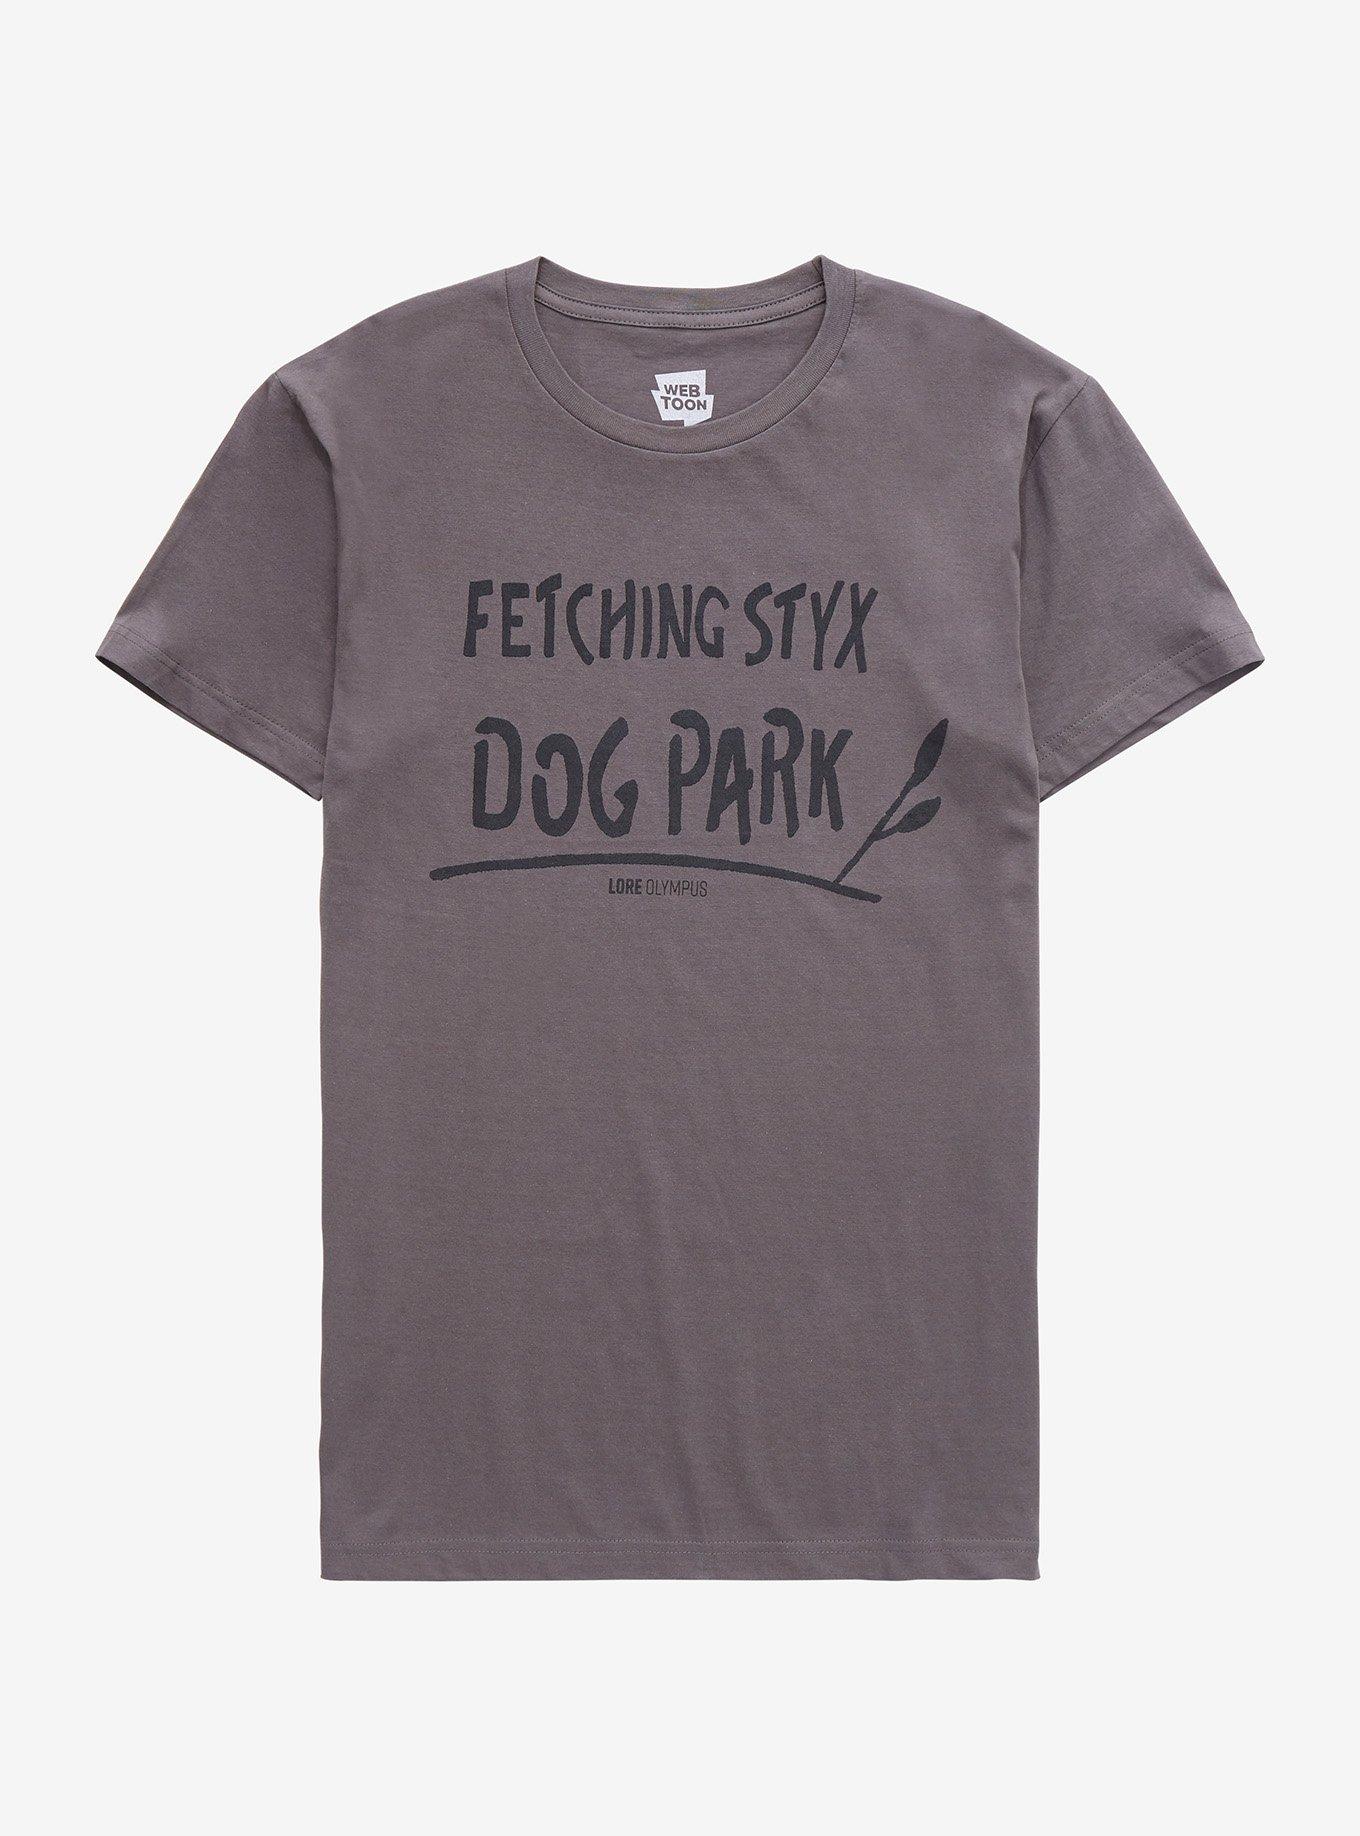 Lore Olympus Fetching Styx Dog Park T-Shirt, CHARCOAL, hi-res